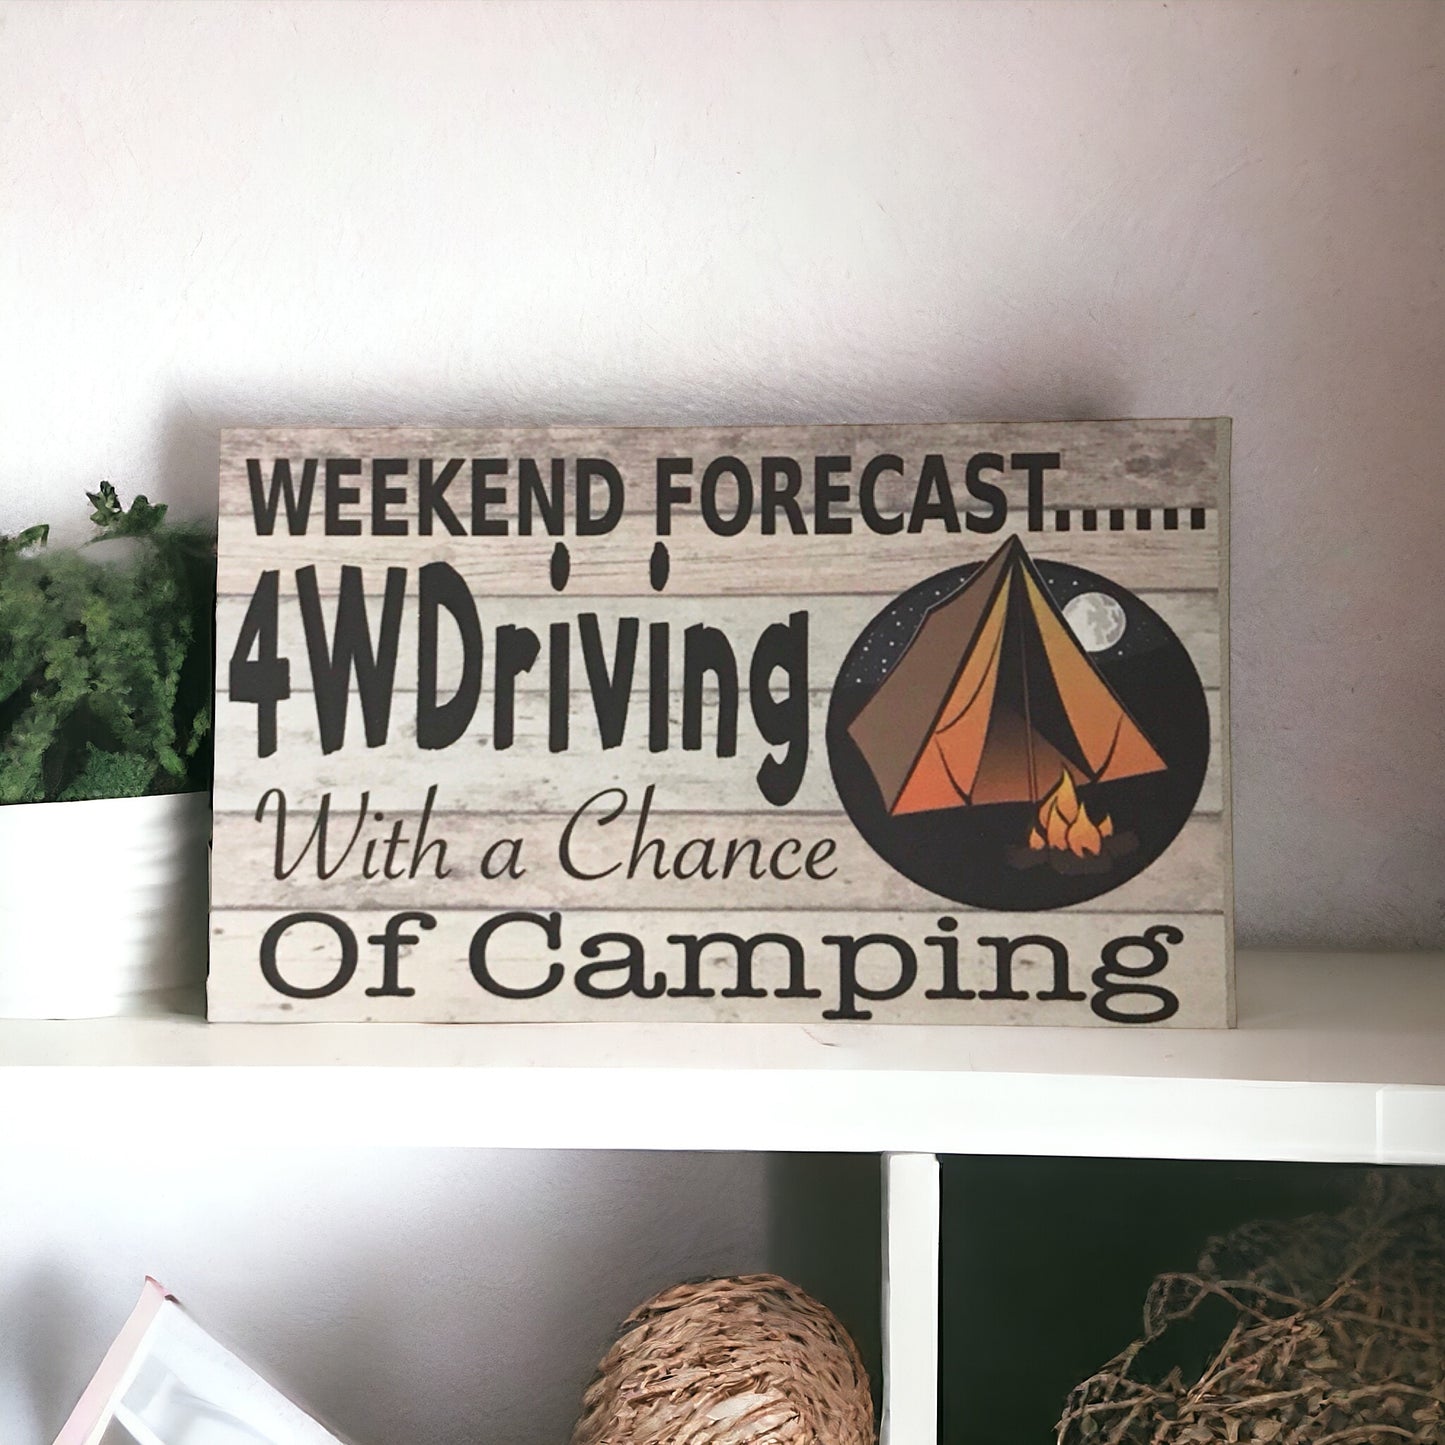 Weekend Forecast 4WDriving 4WD Camping Sign - The Renmy Store Homewares & Gifts 